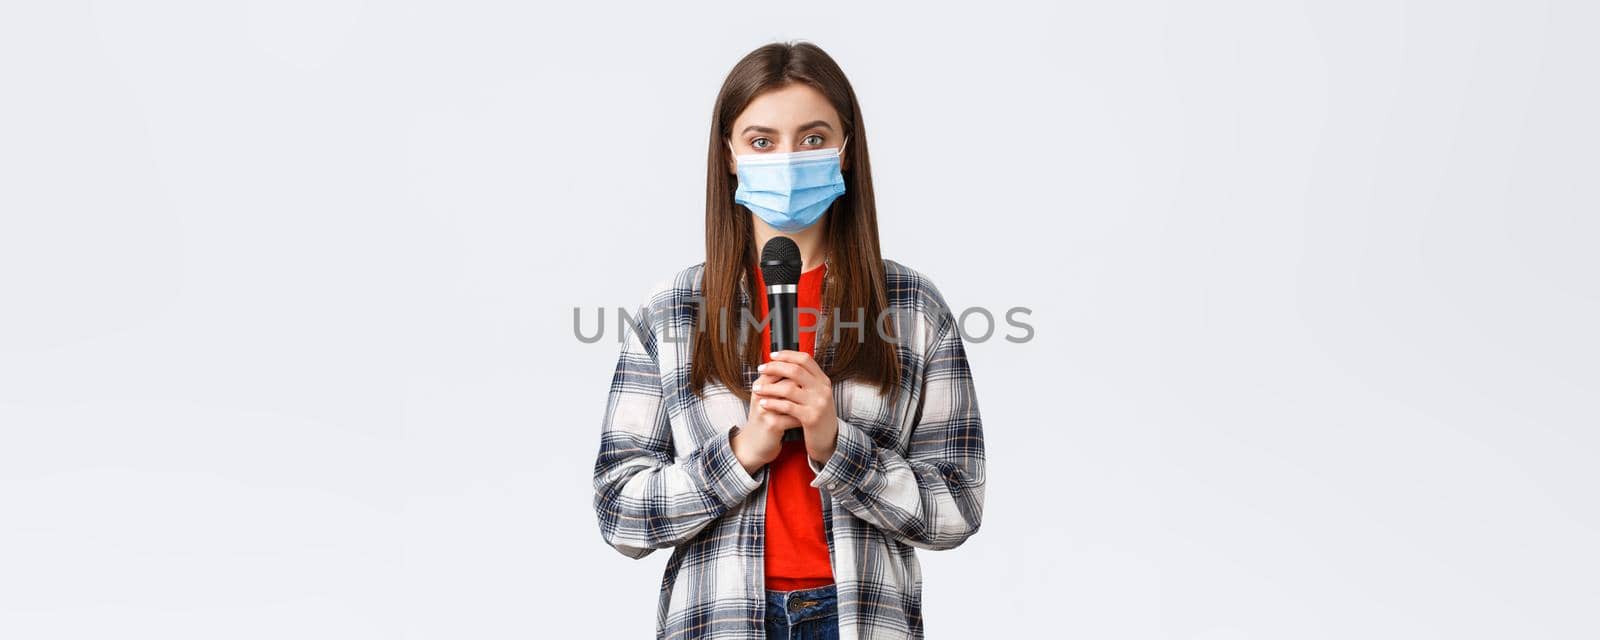 Coronavirus outbreak, leisure on quarantine, social distancing and emotions concept. Girl in medical mask performing song or stand-up, holding microphone want be heard, white background by Benzoix